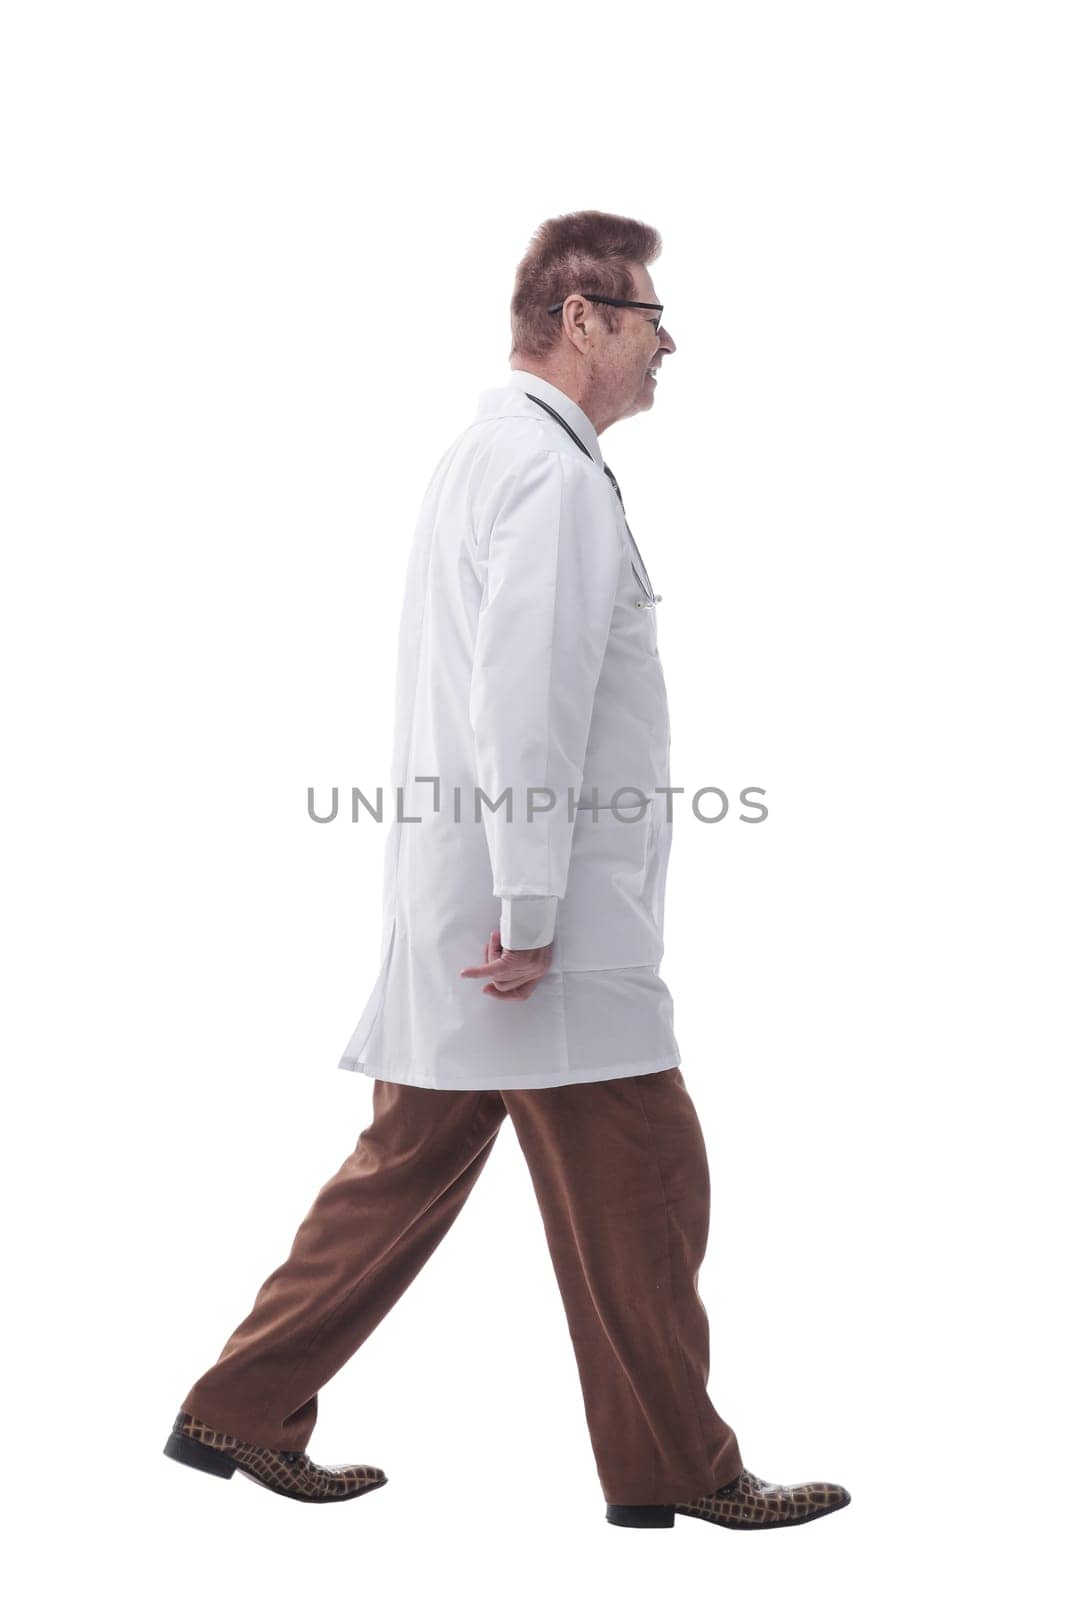 in full growth. a confident therapist, stepping forward. isolated on a white background